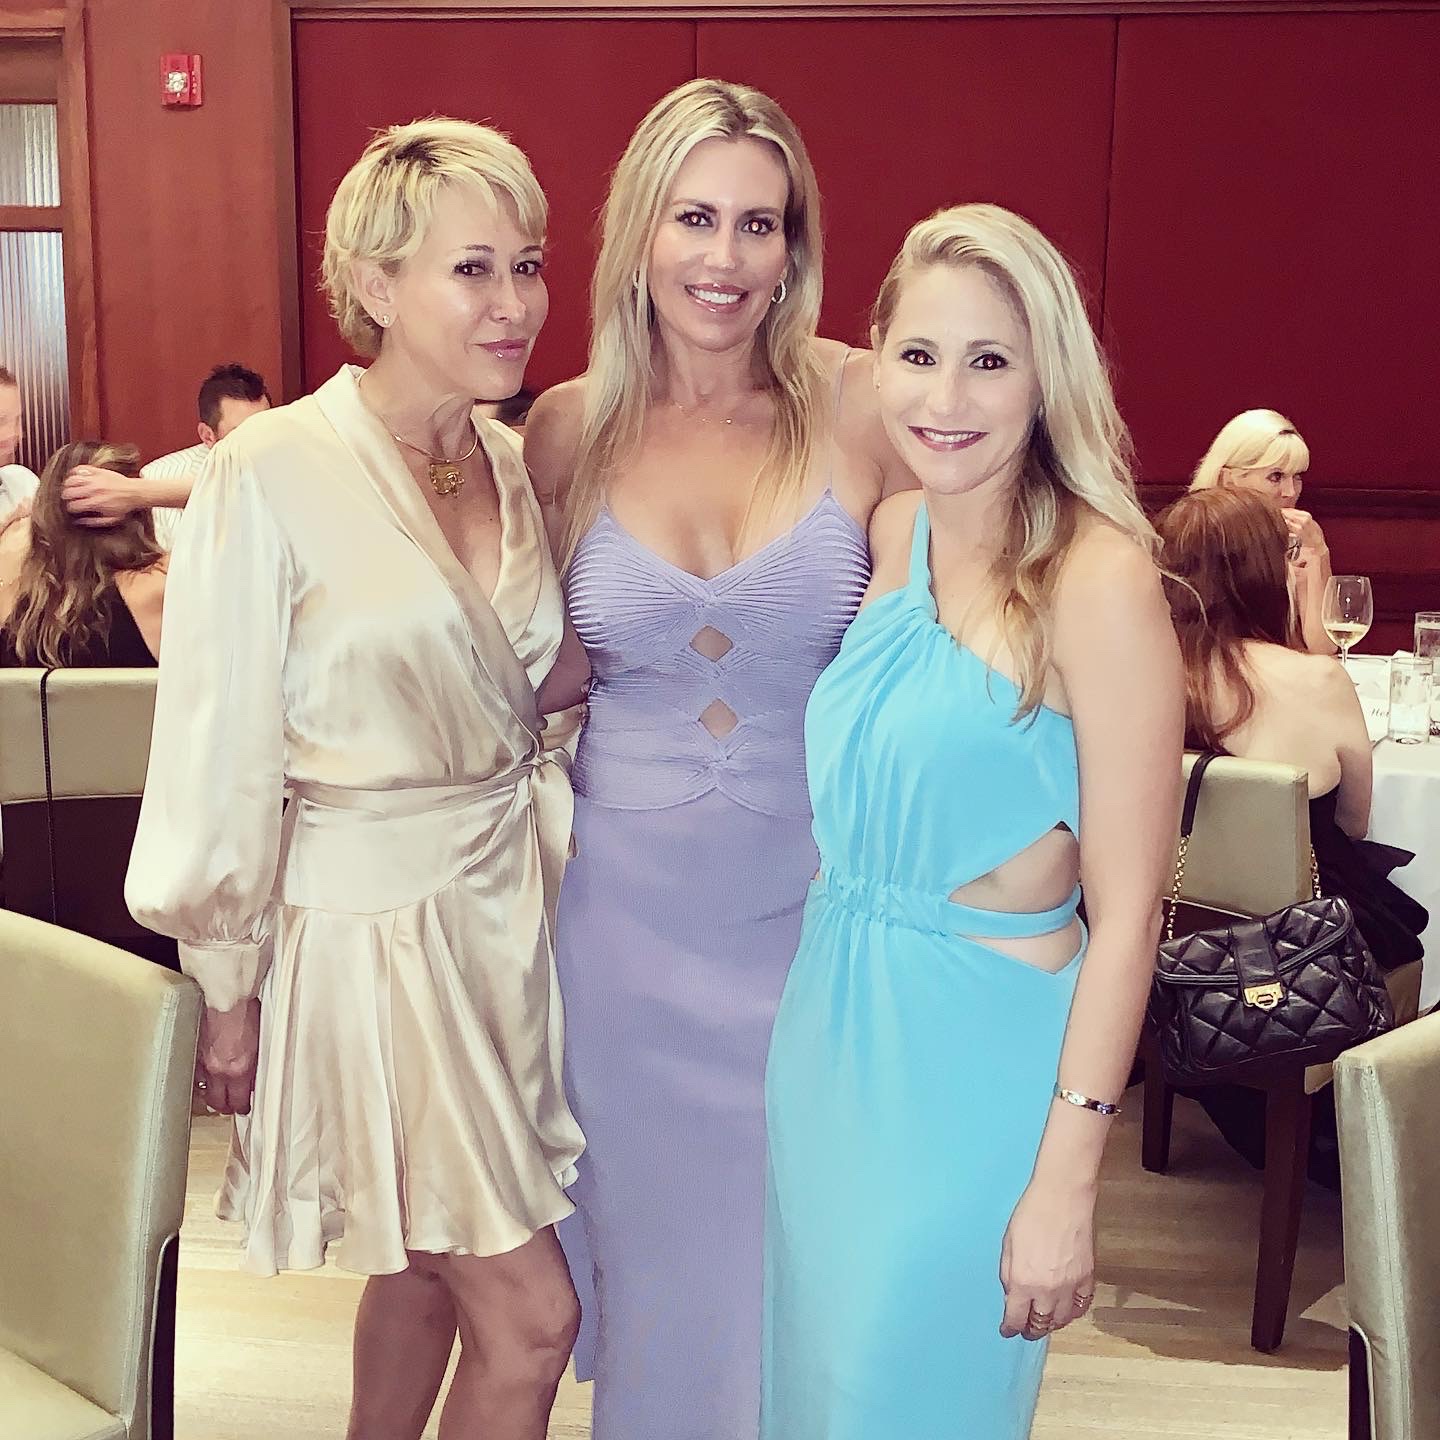 A group of three white blonde women in fancy dresses smile for the camera, standing in front of tables full of people.